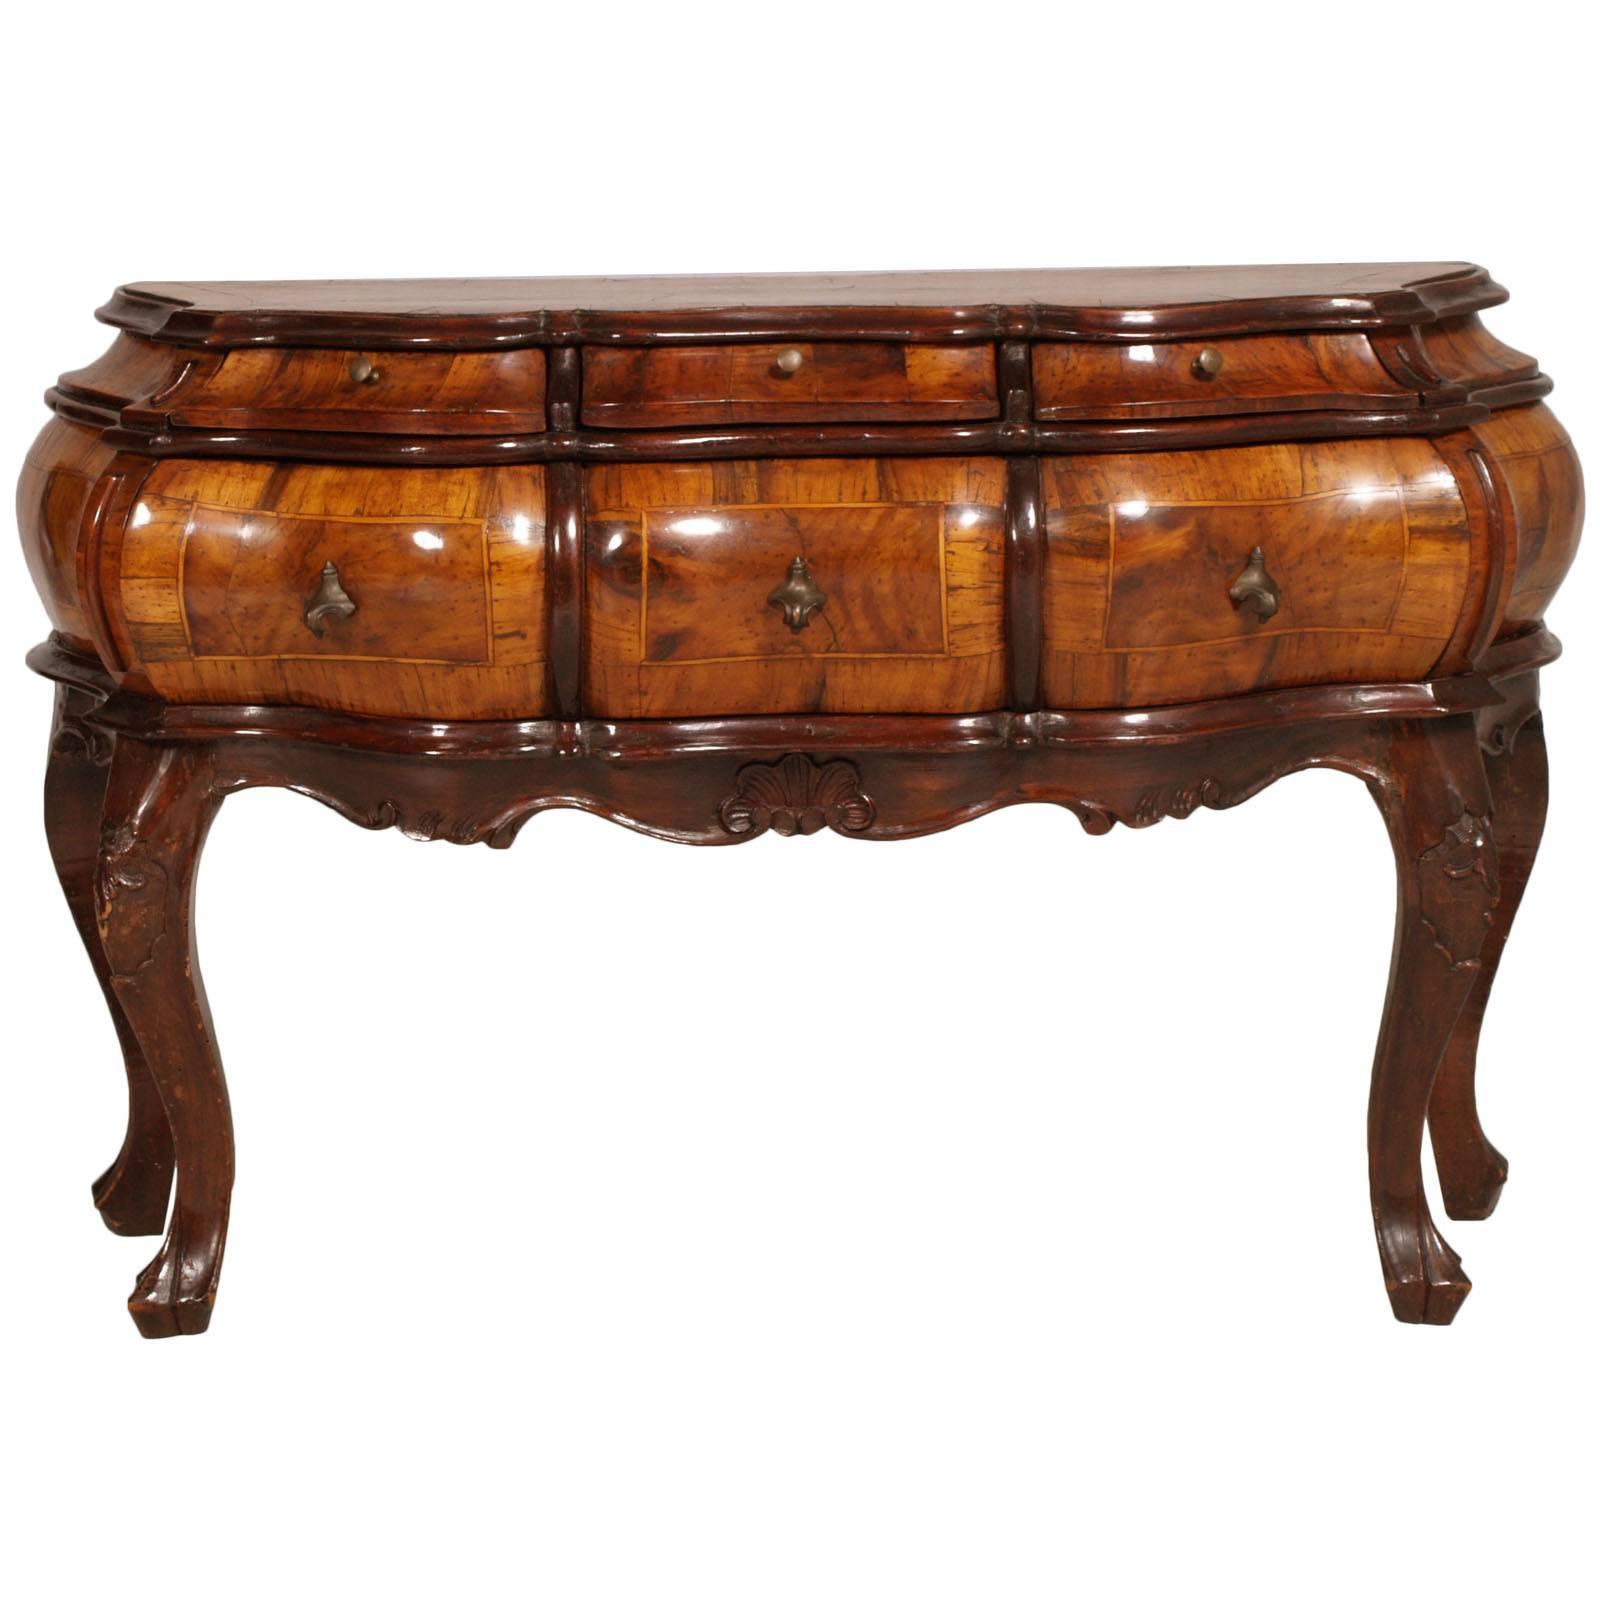 Important precious 19th century Venetian Baroque low dresser console, hand-carved walnut, and burl walnut inlaid

All solid wood including bottom of the drawers and back

Measure in cm : H 64 W 100 D 42.